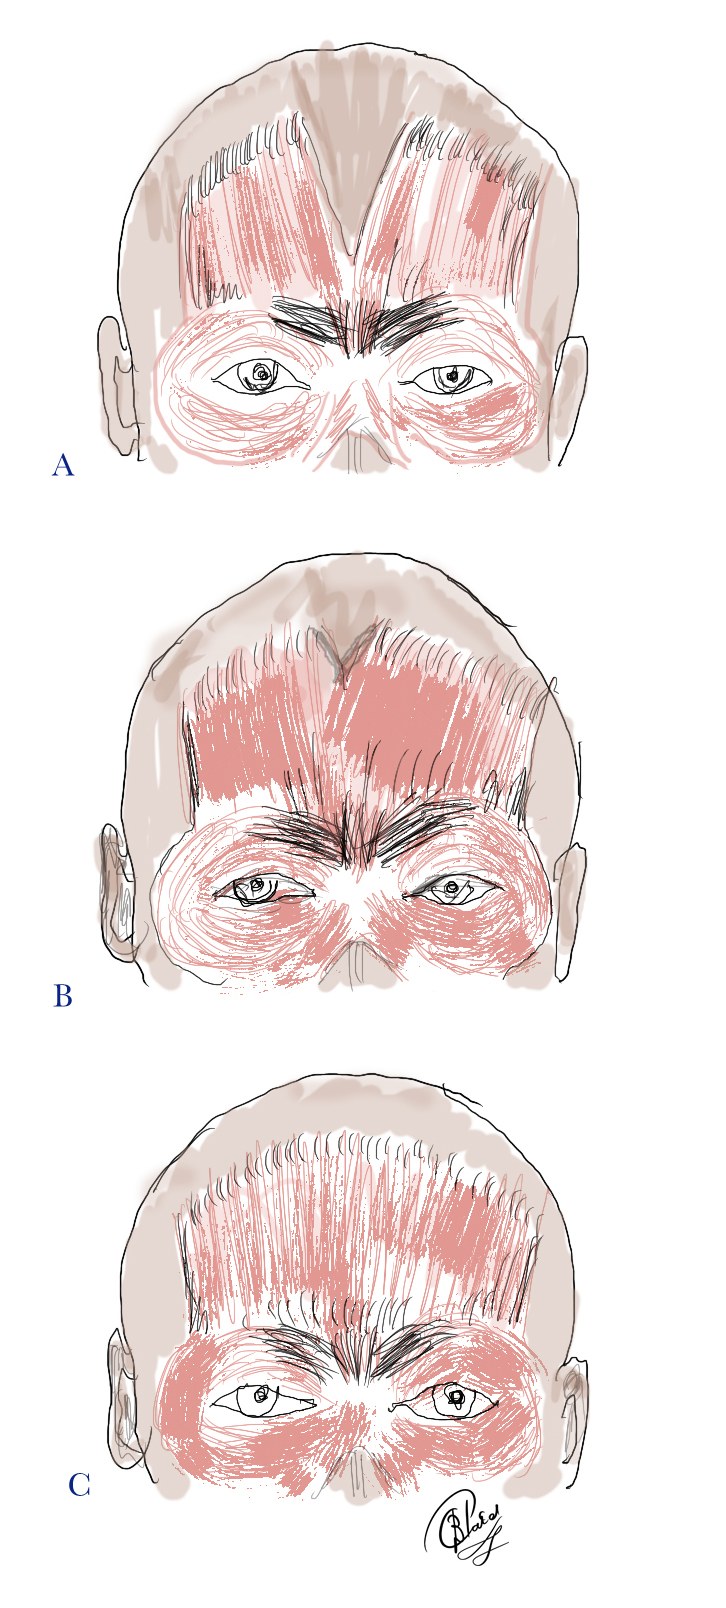 The Fronatalis Muscle: Bifurcation of the frontalis muscle may be 
A